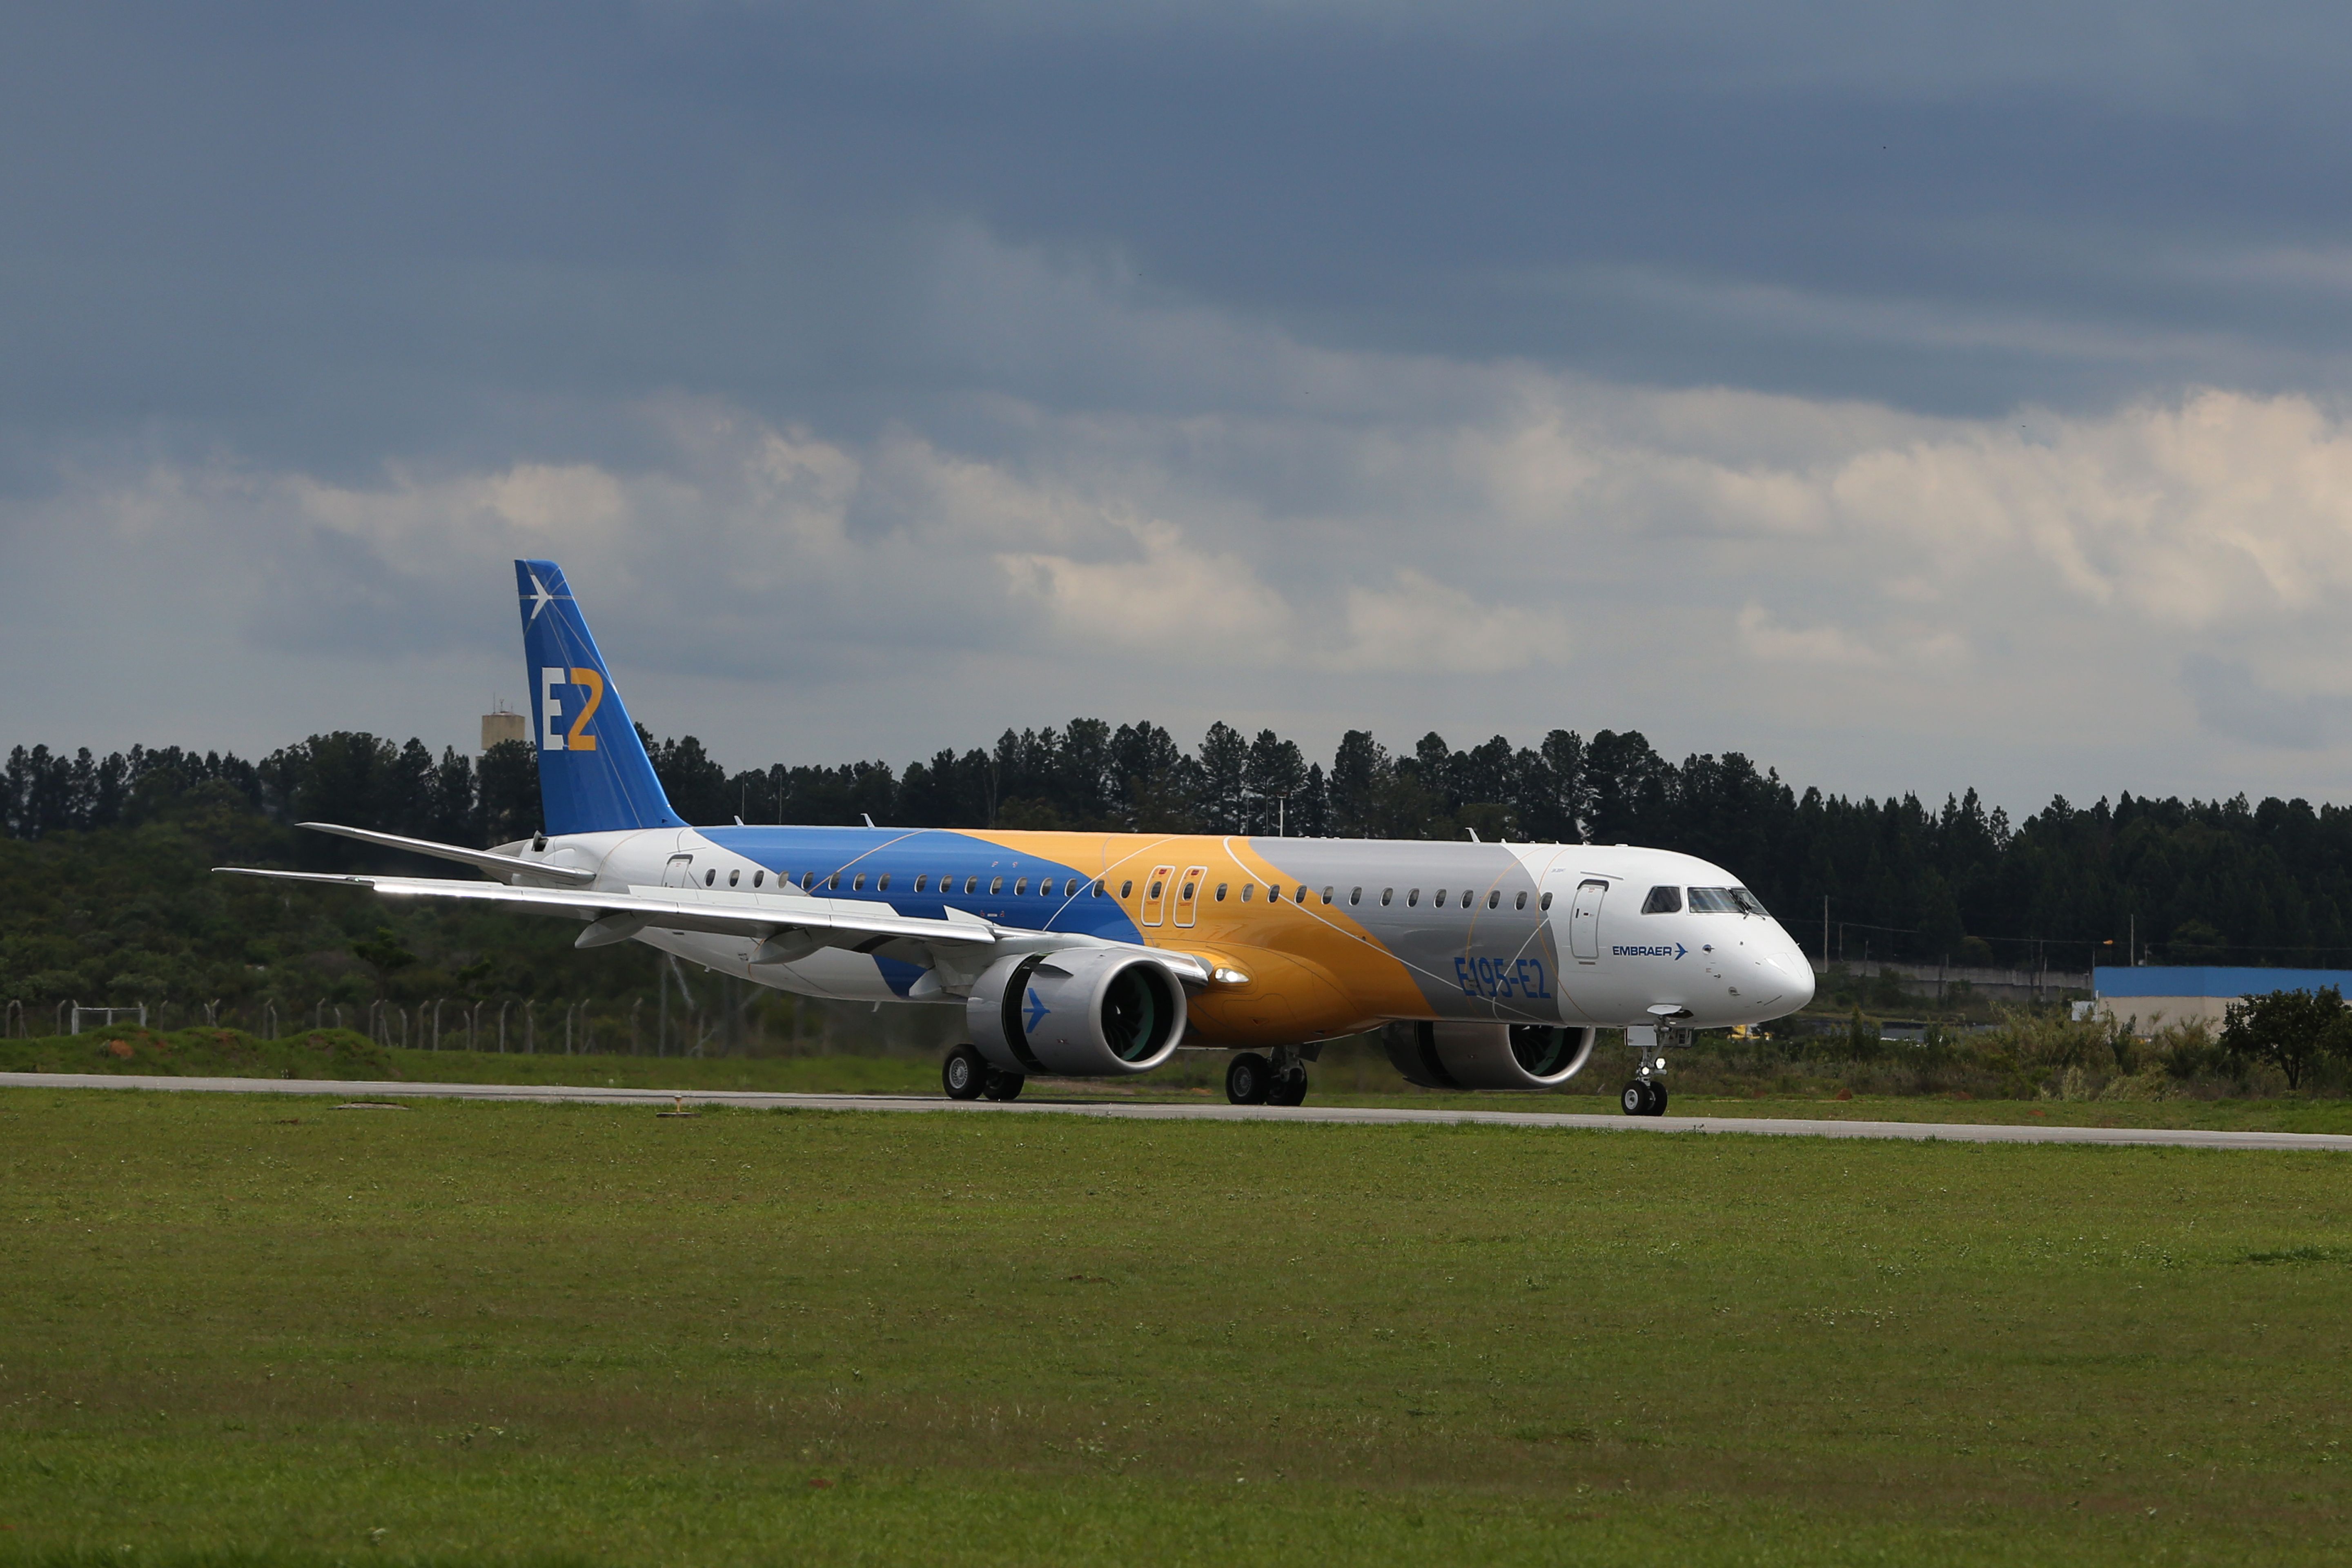 An Embraer E915-E2 in house livery on a taxiway.